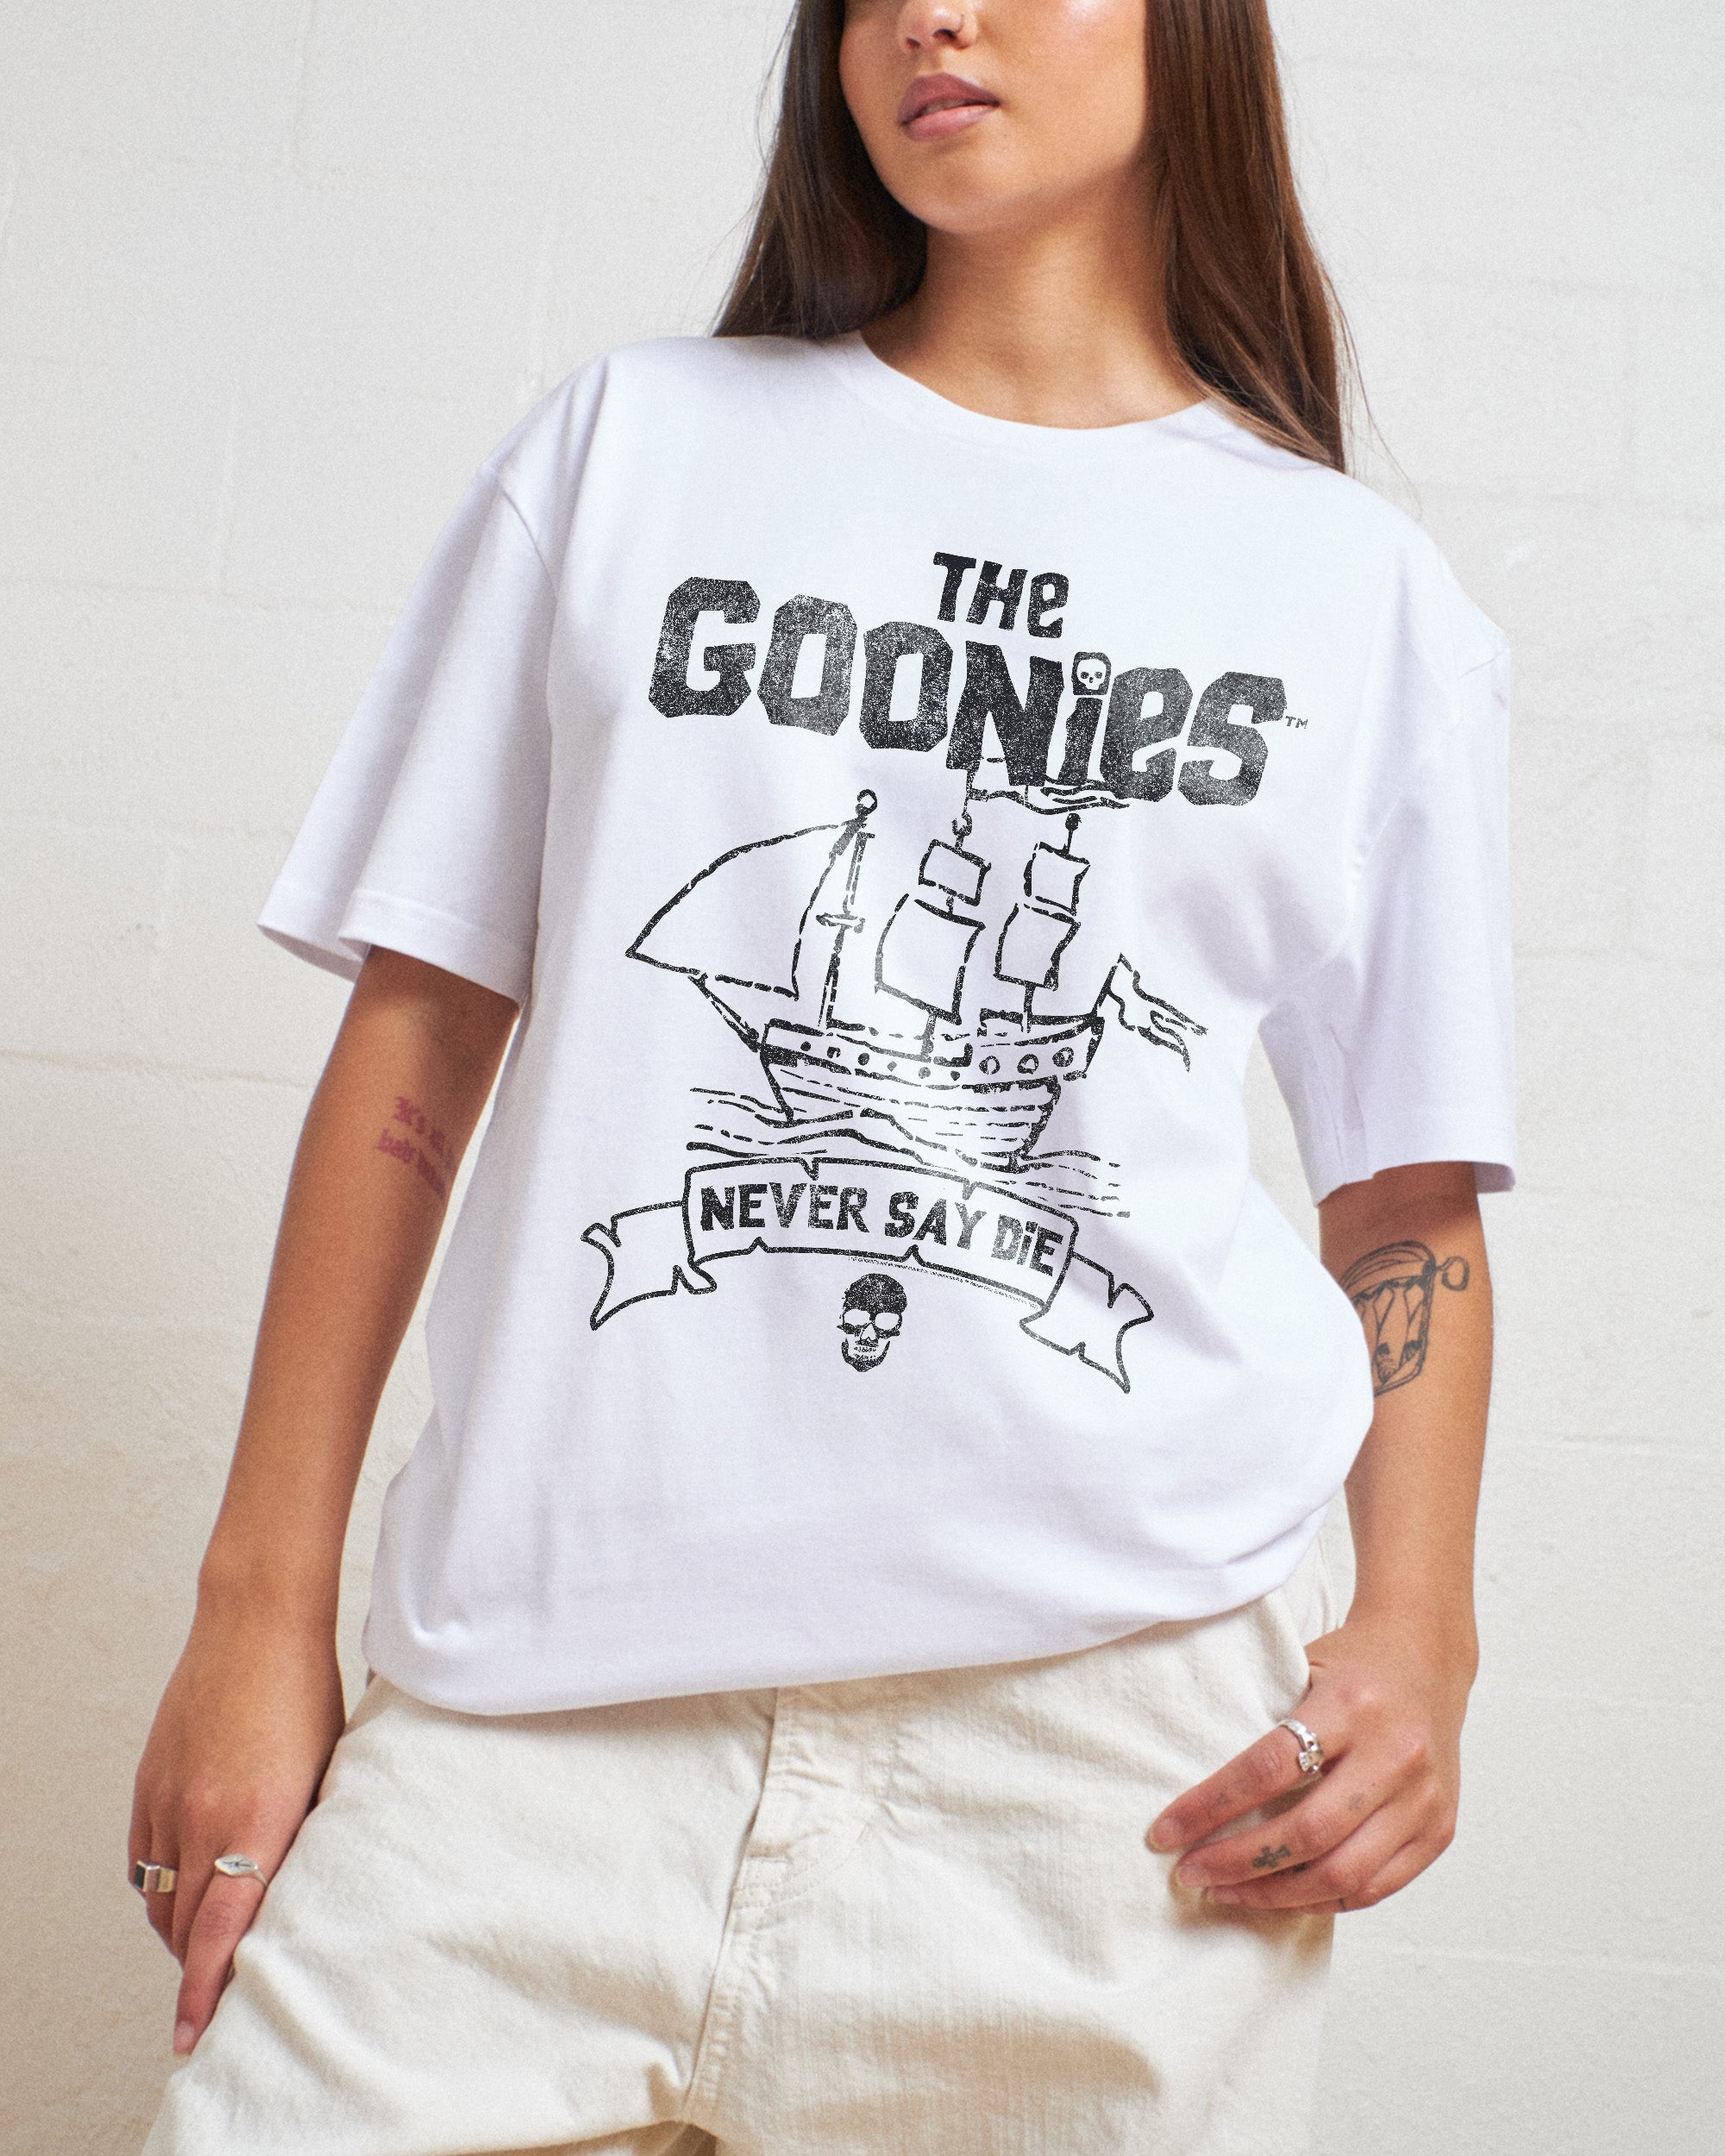 Goonies One Eyed Willie Ship T-Shirt